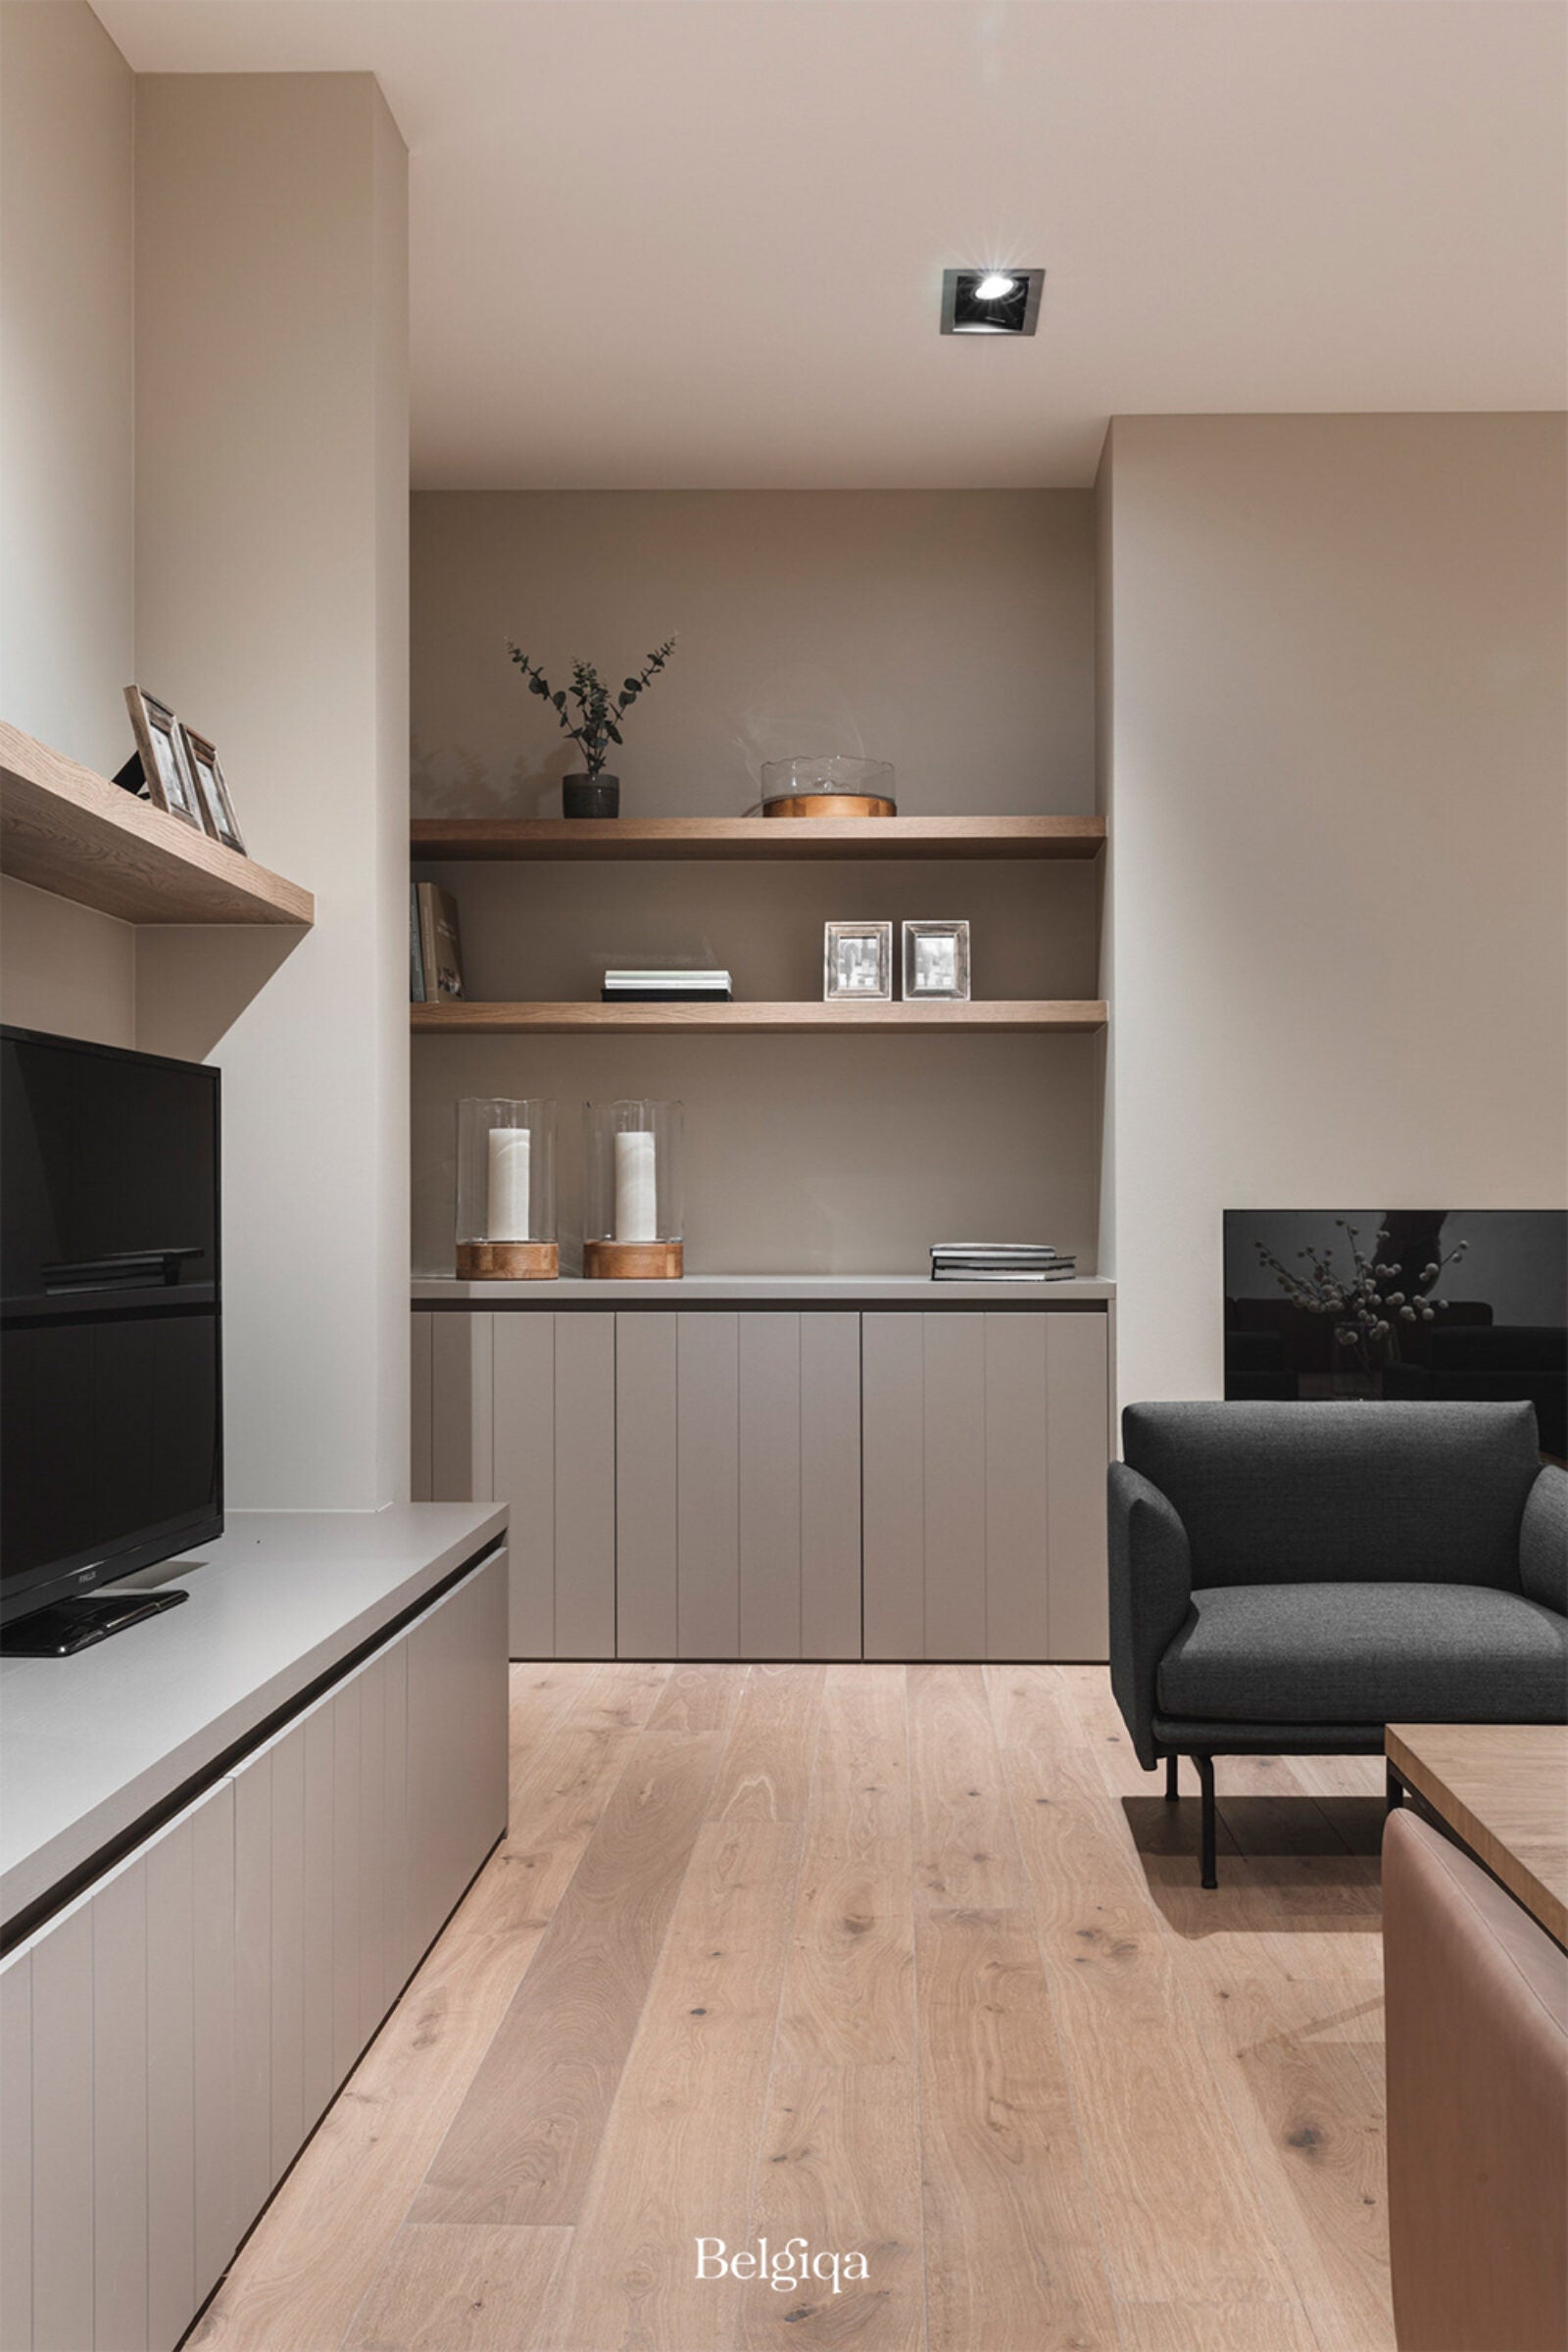 Transform Your Space with BLQ-GN. European Oak engineered for strength, coastal tranquility. Light & dark grey tones